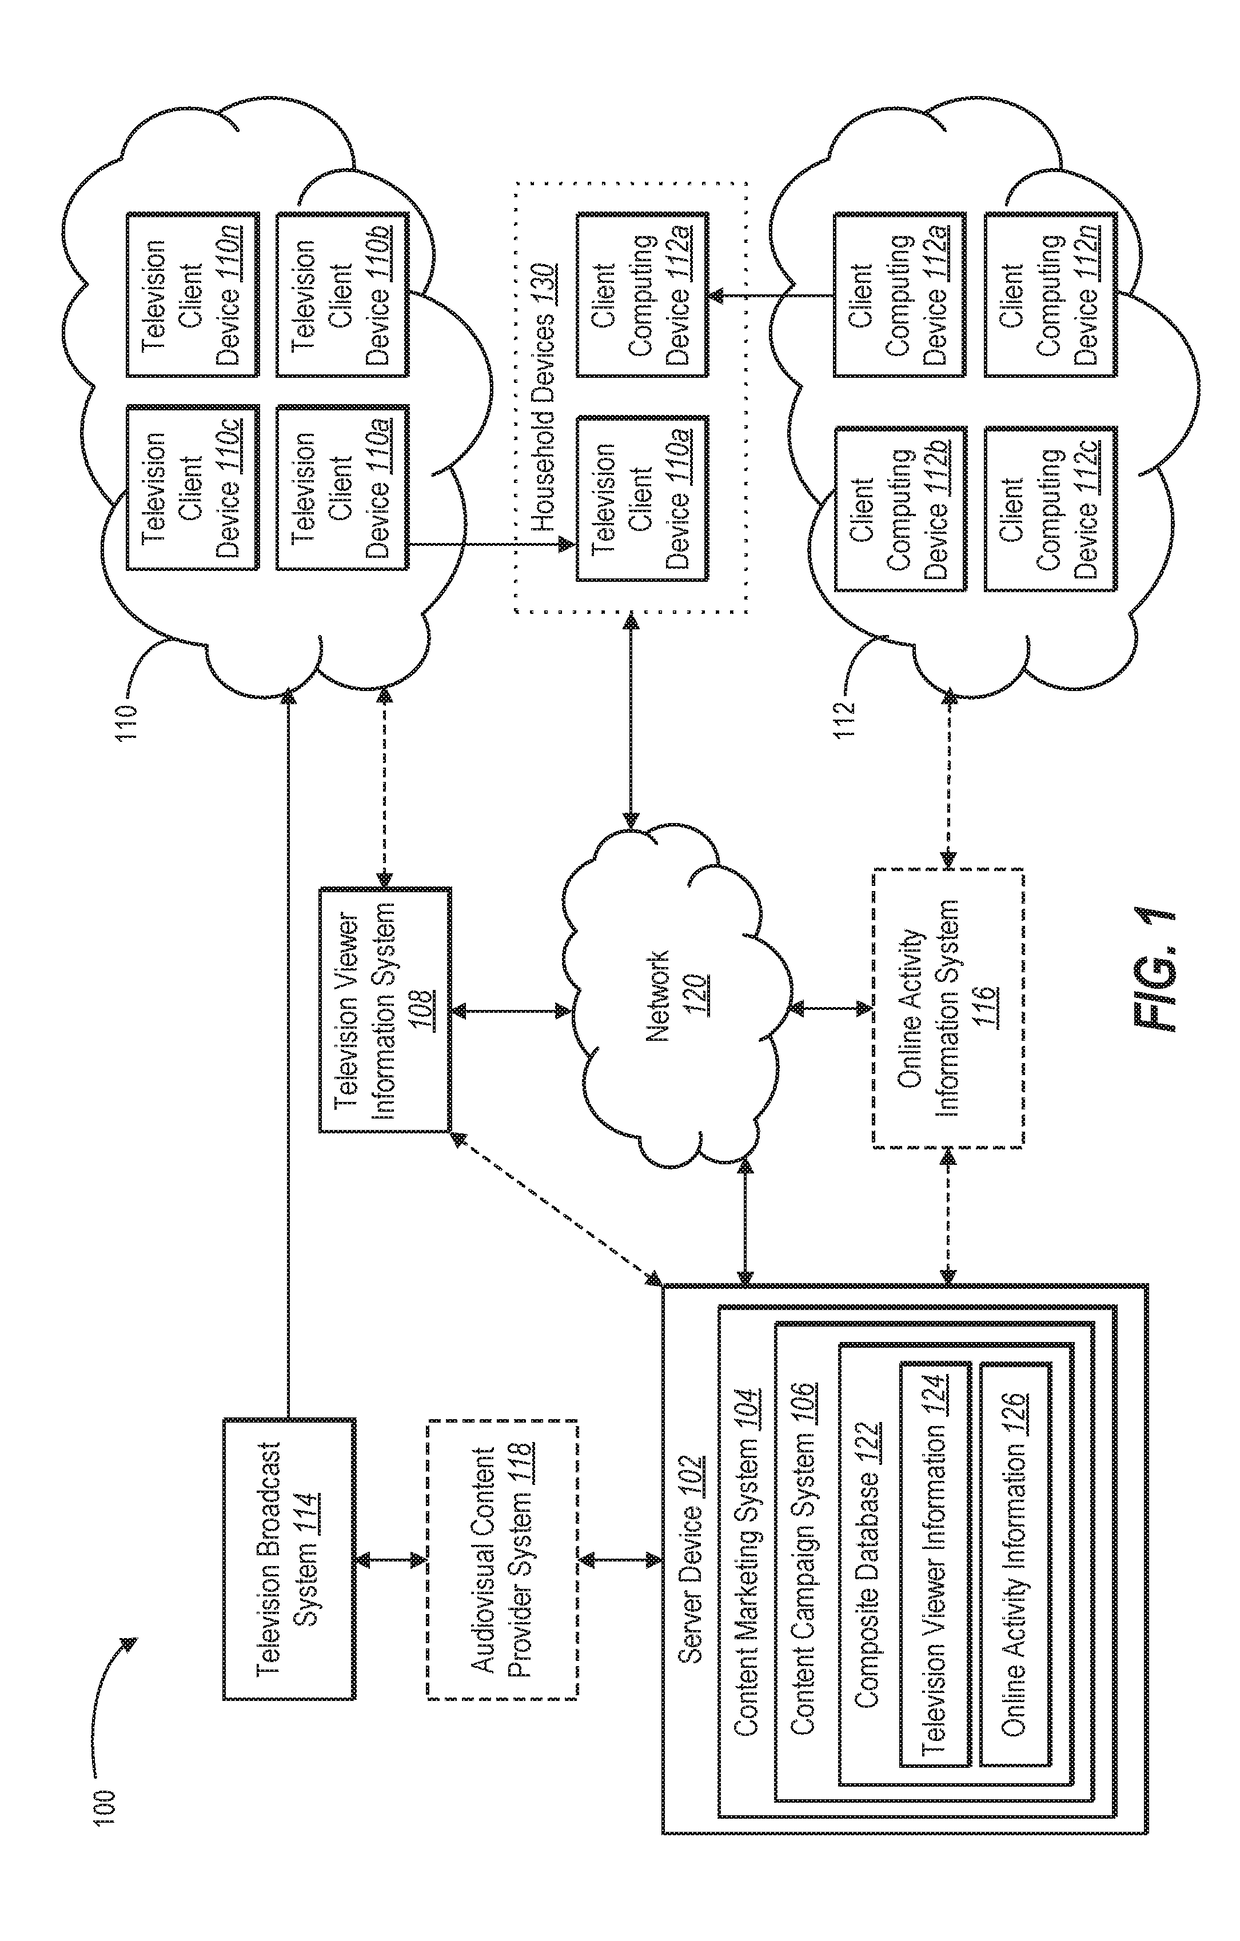 Digital audiovisual content campaigns using merged television viewer information and online activity information